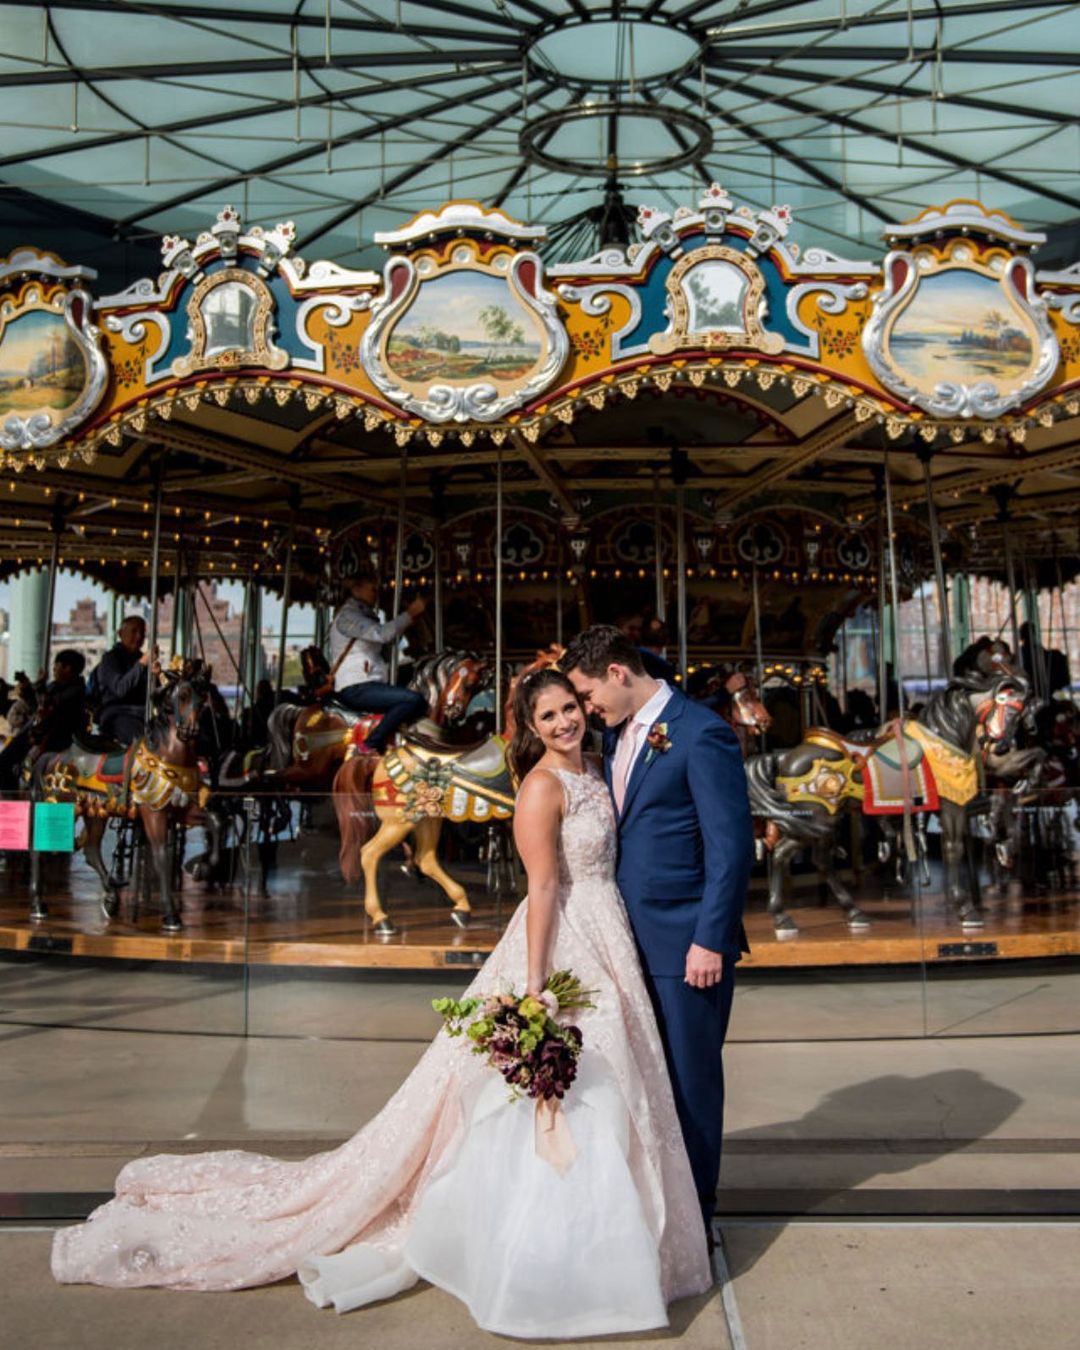 Bride and groom in front of merry go 'round